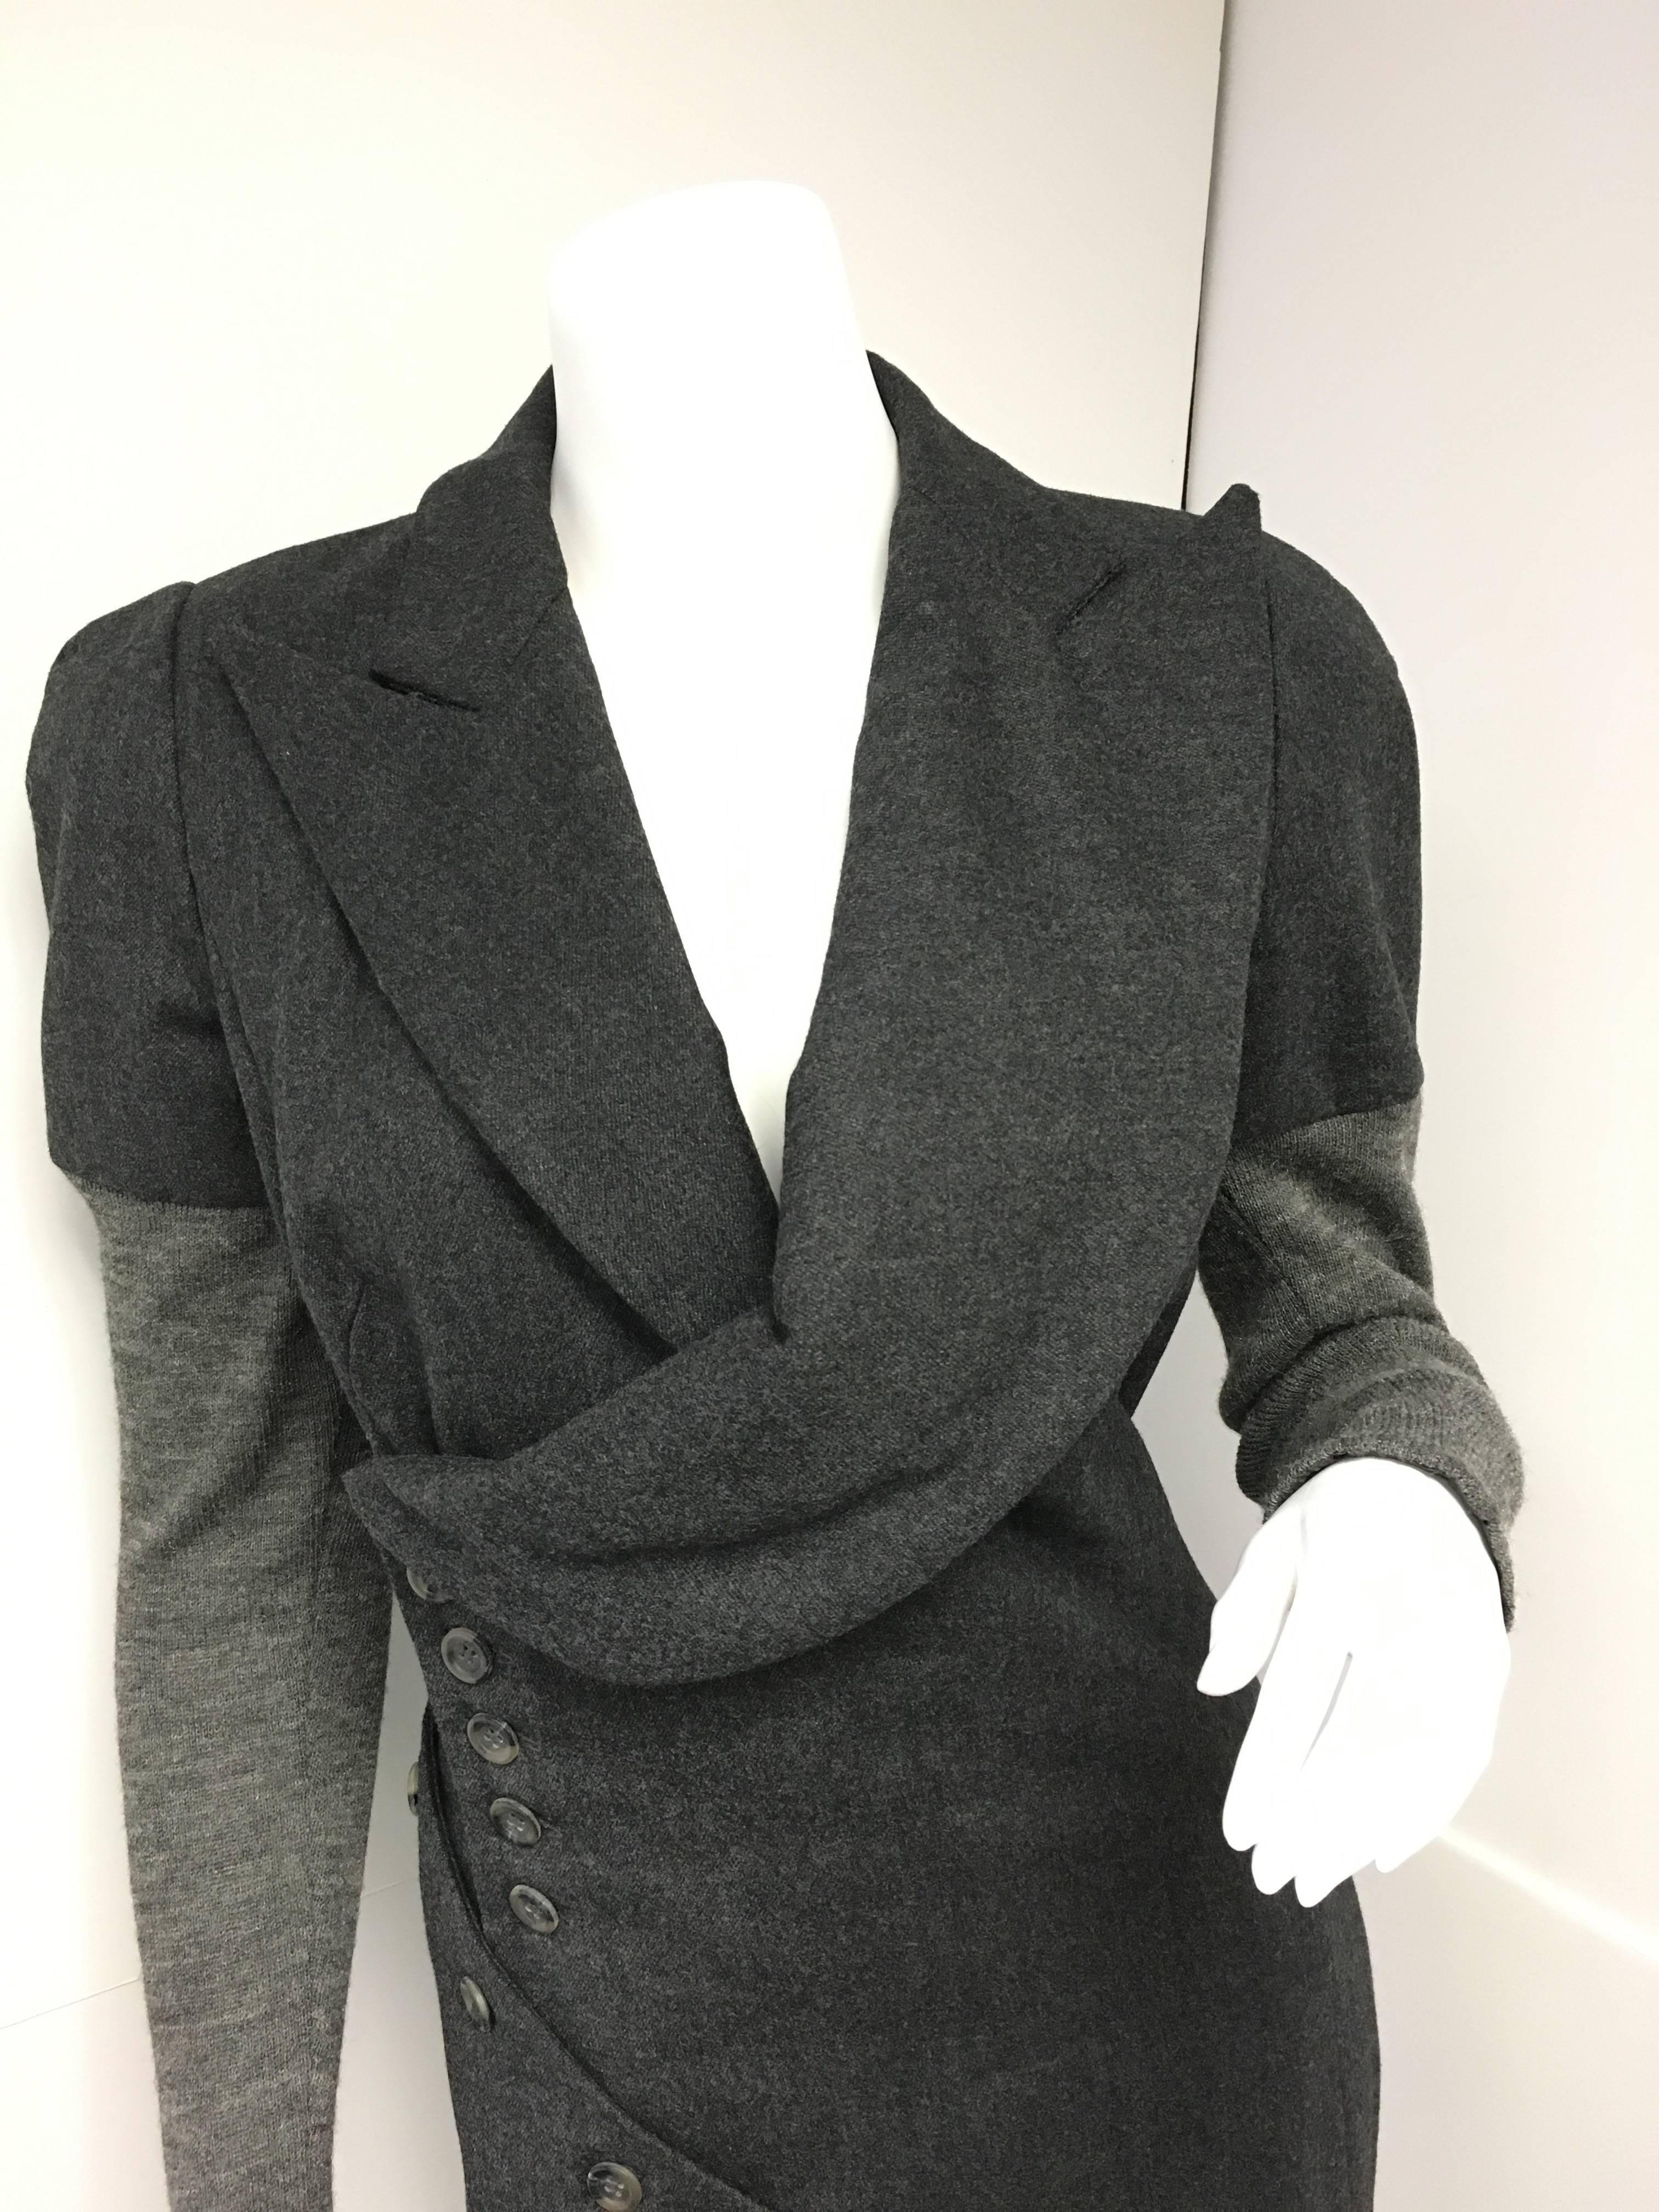 Amazing early Alexander McQueen gray wool fitted dress with knit sleeves.  
A-symmetrical neckline with button closures begin under the right arm and circle around the body all the way down to the hemline. These buttons are working. Fully lined.